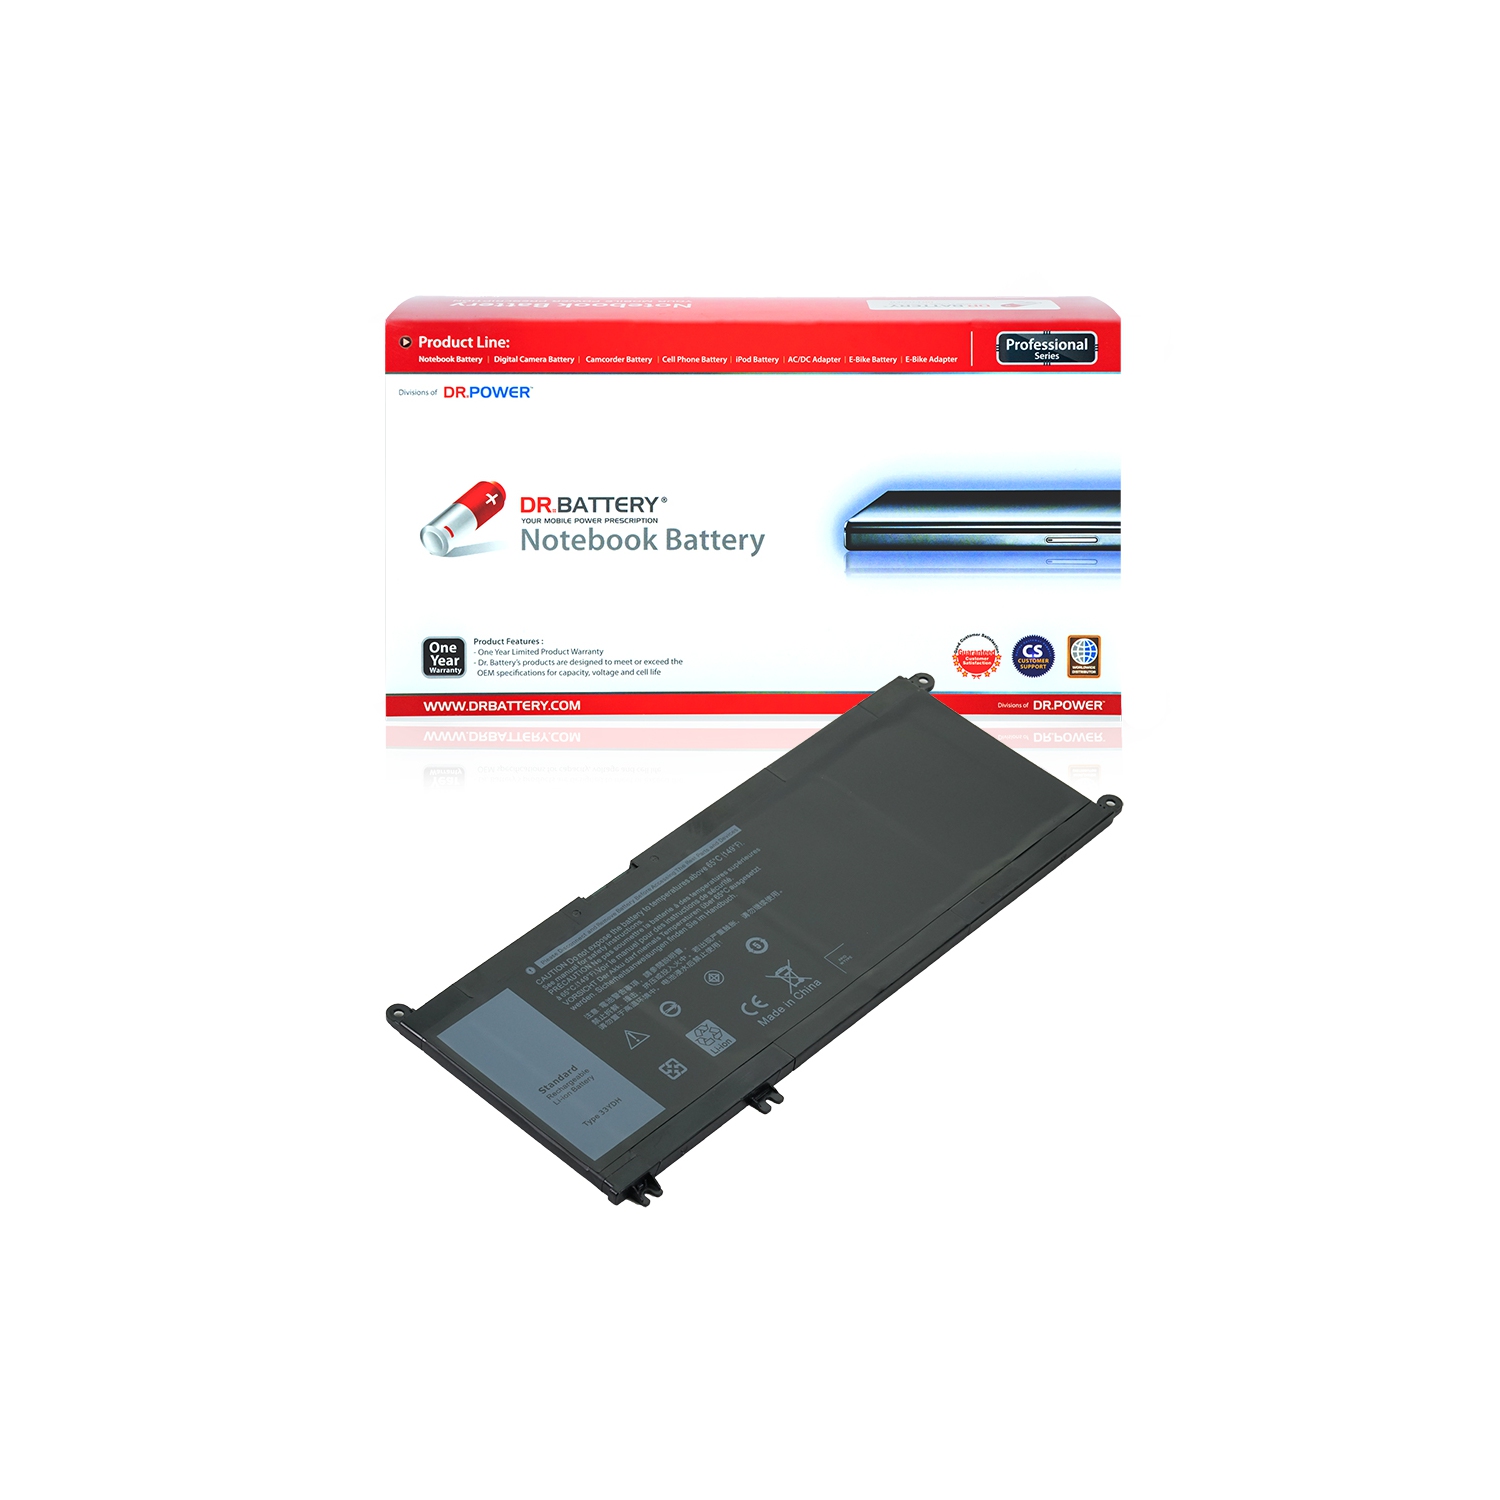 DR. BATTERY - Replacement for Dell G3 17 Inspiron 17 7778 / Inspiron 7778 / 3779 / G5 15 5587 / PVHT1 / 081PF3 / 0PVHT1